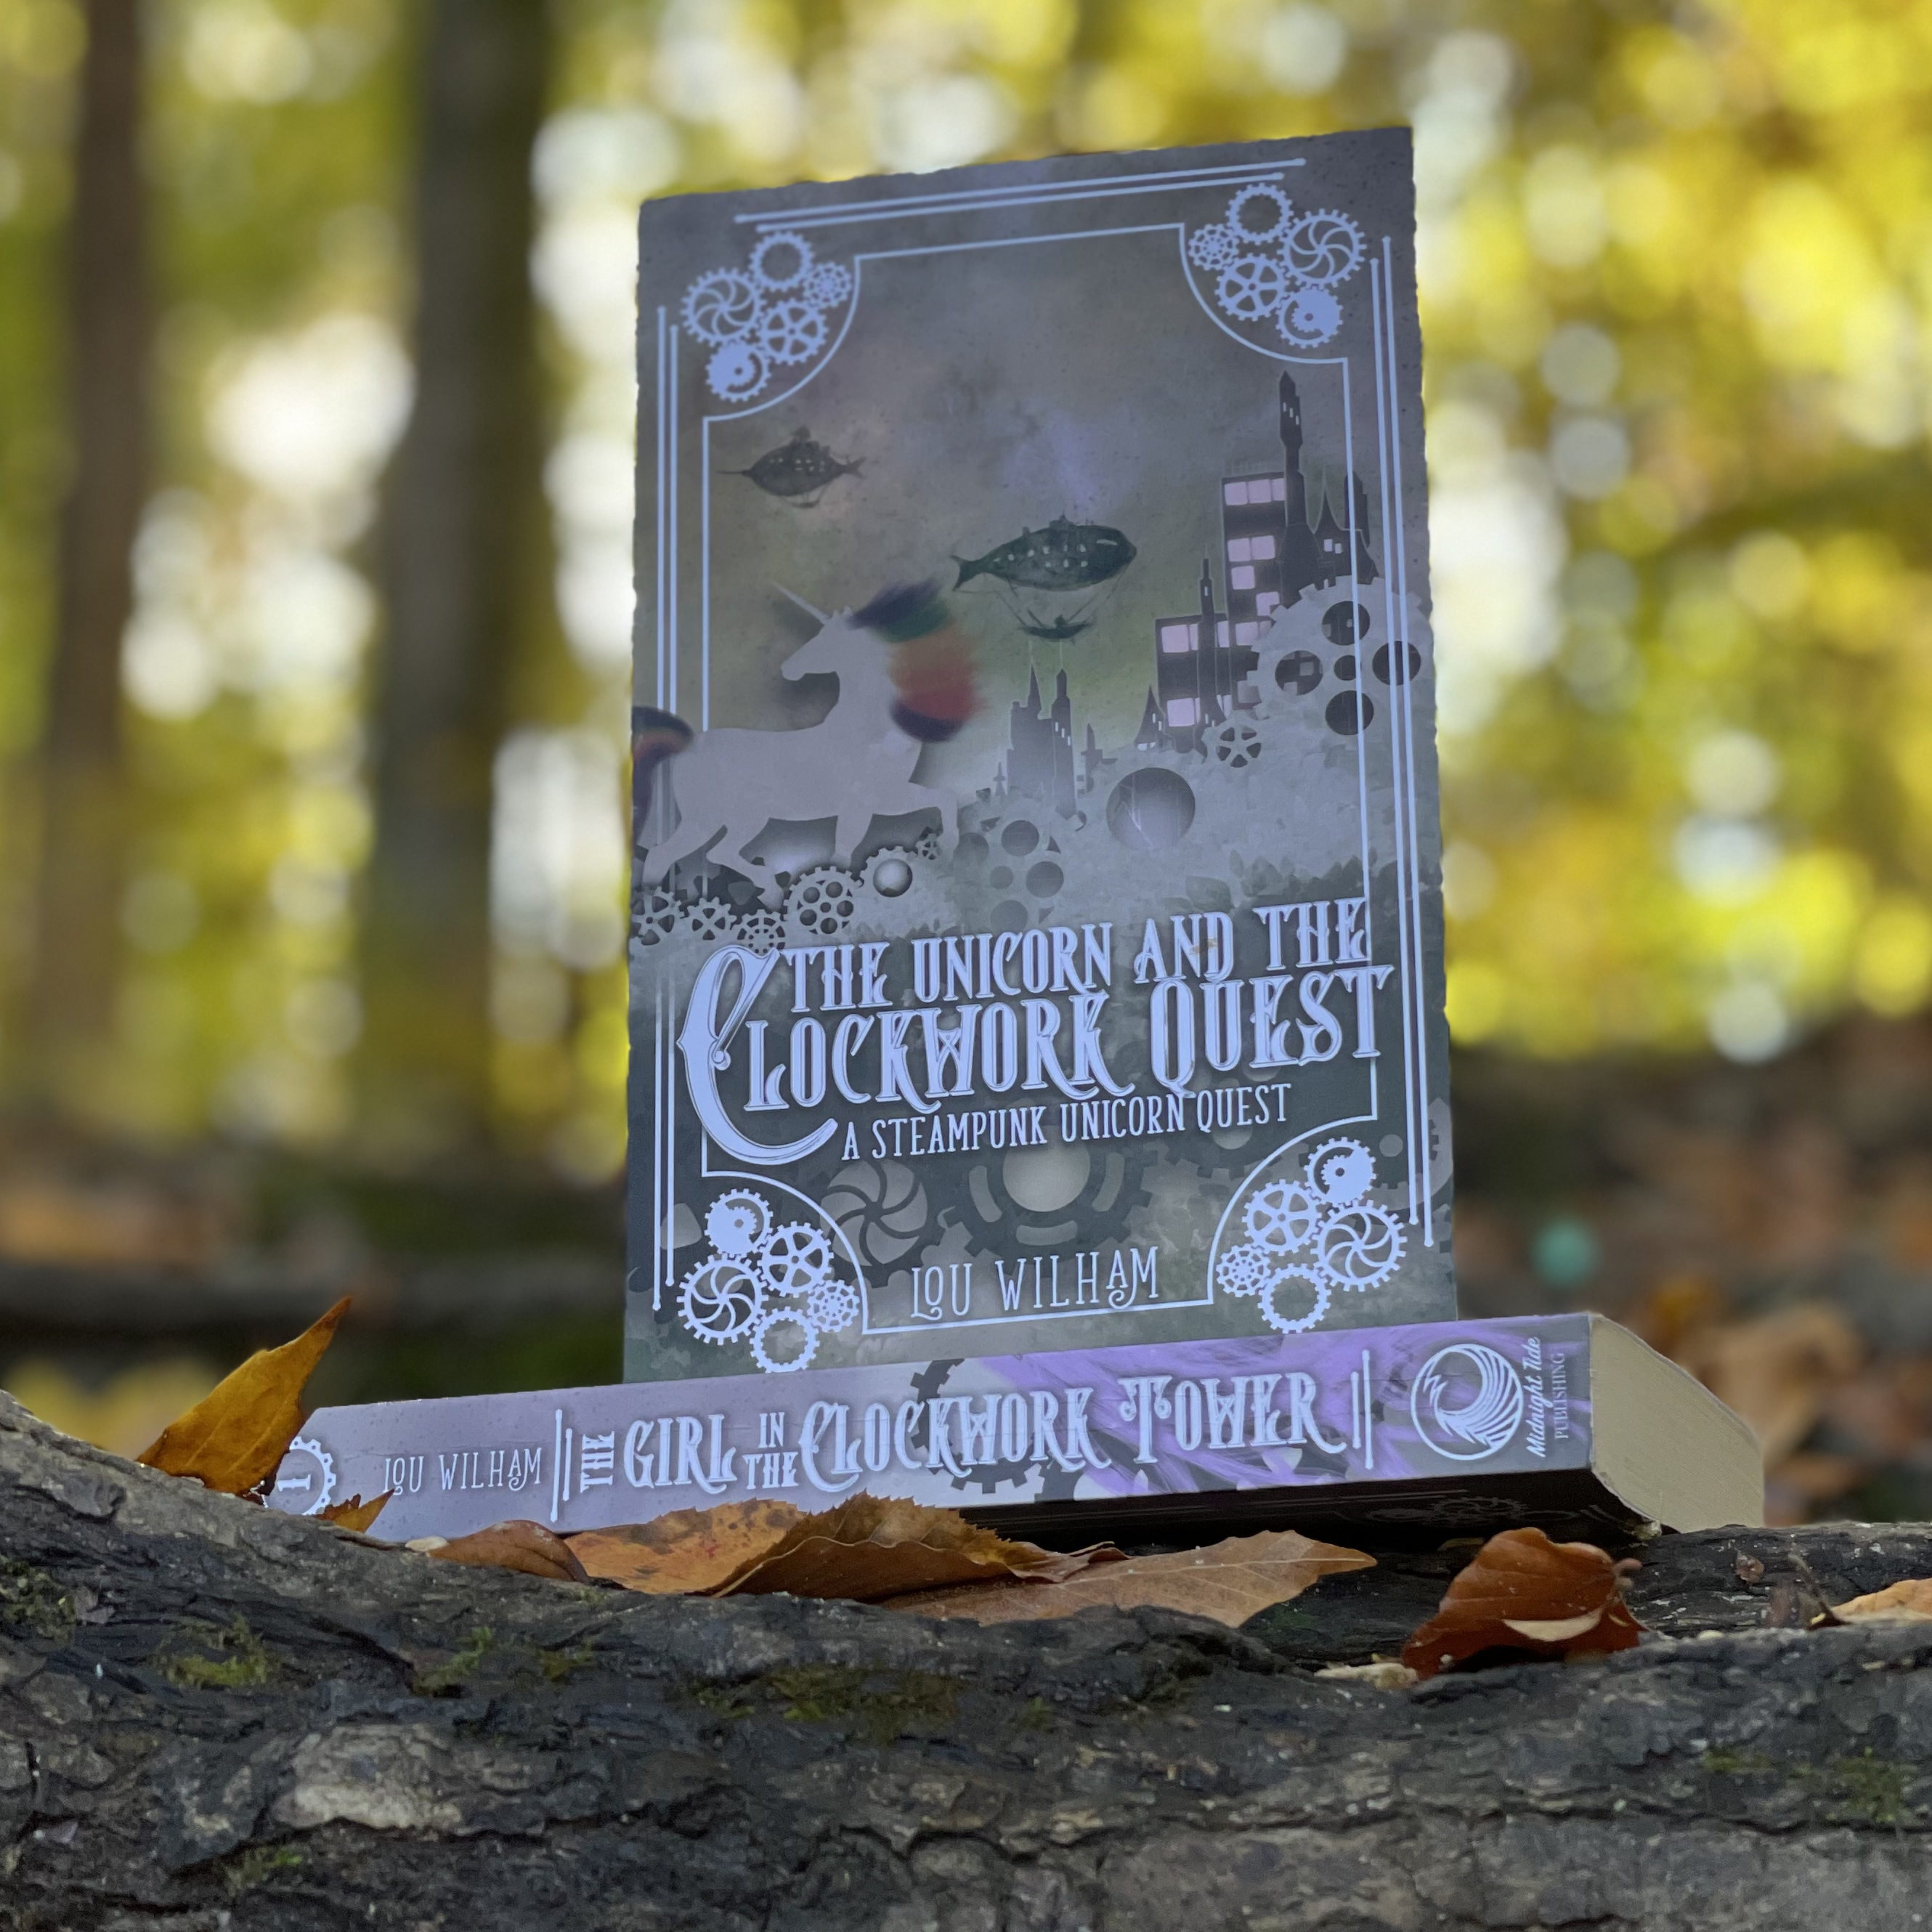 SIGNED copy of The Unicorn and the Clockwork Quest(paperback)